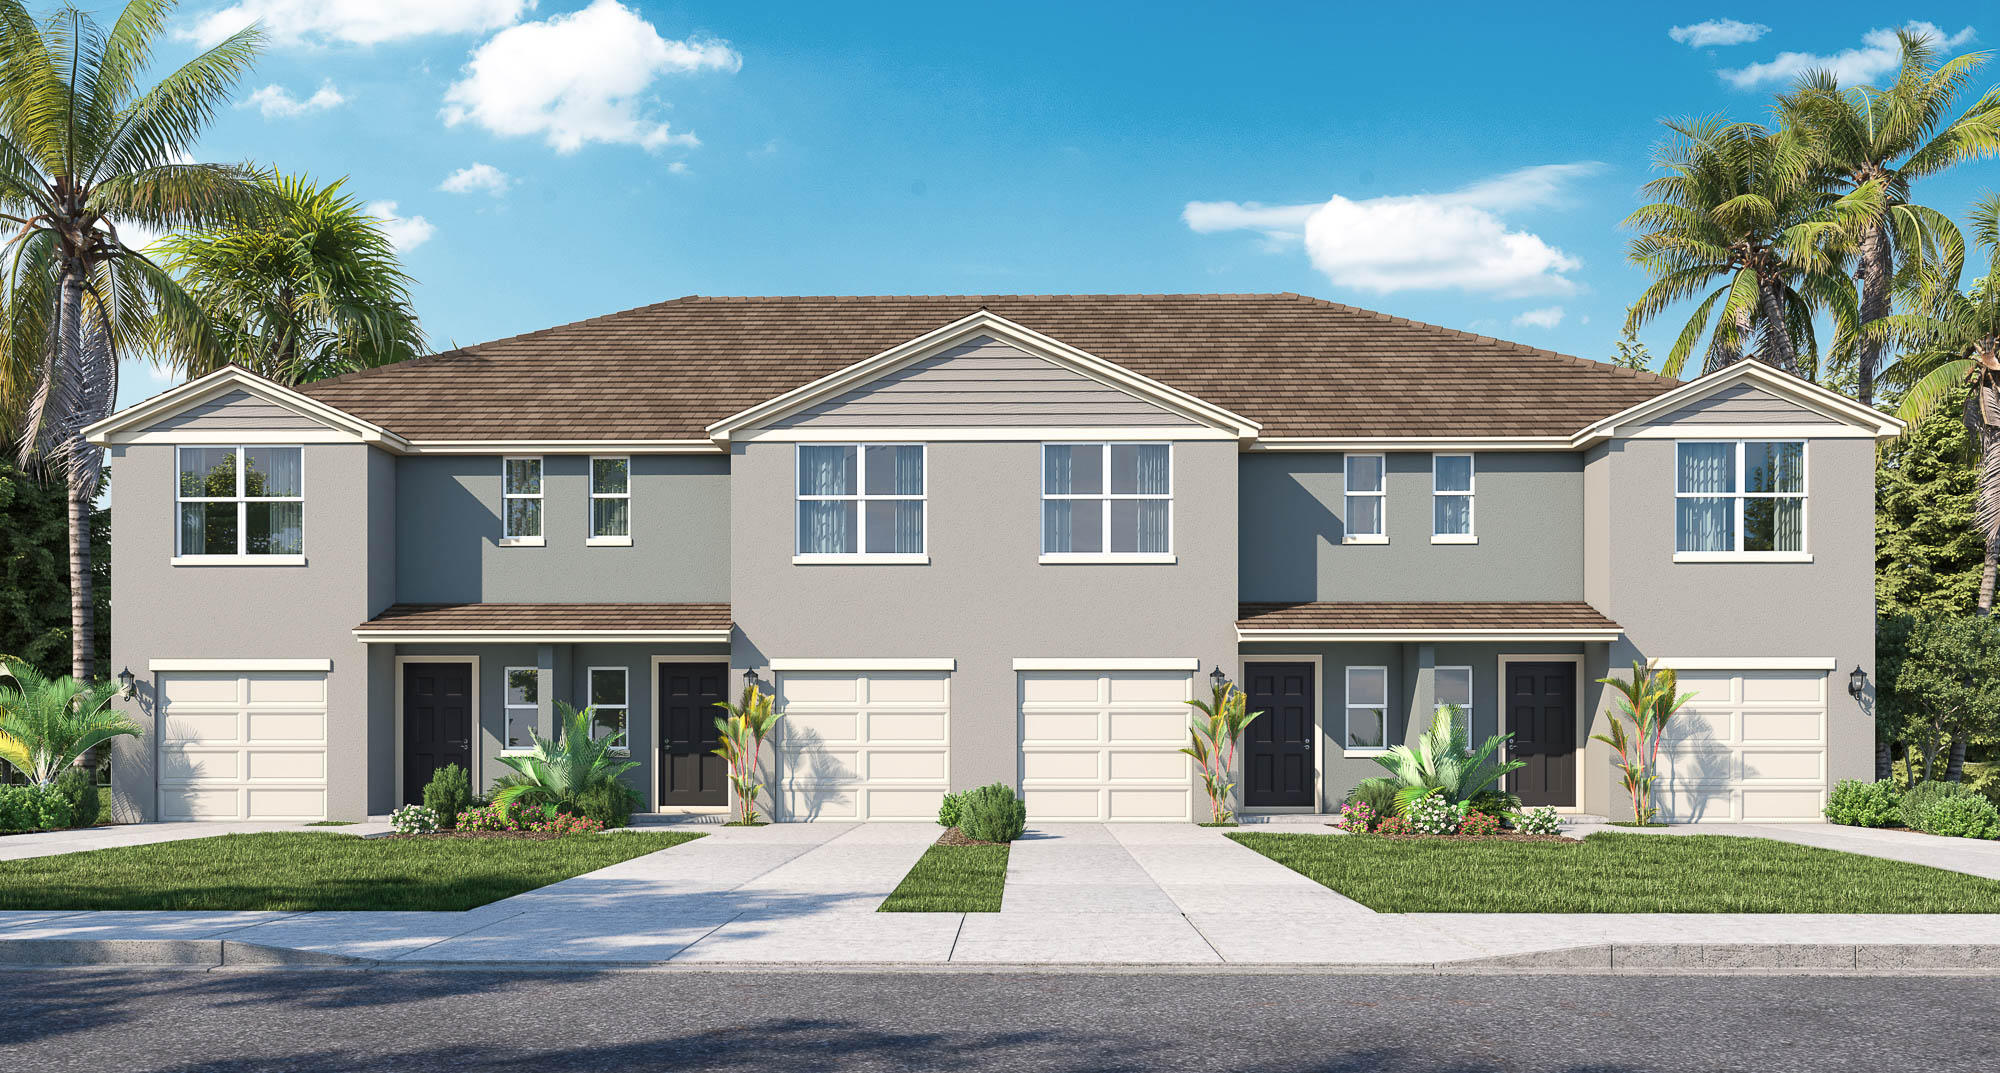 Image 3 | Crestview at Grove West - Townhomes for Rent